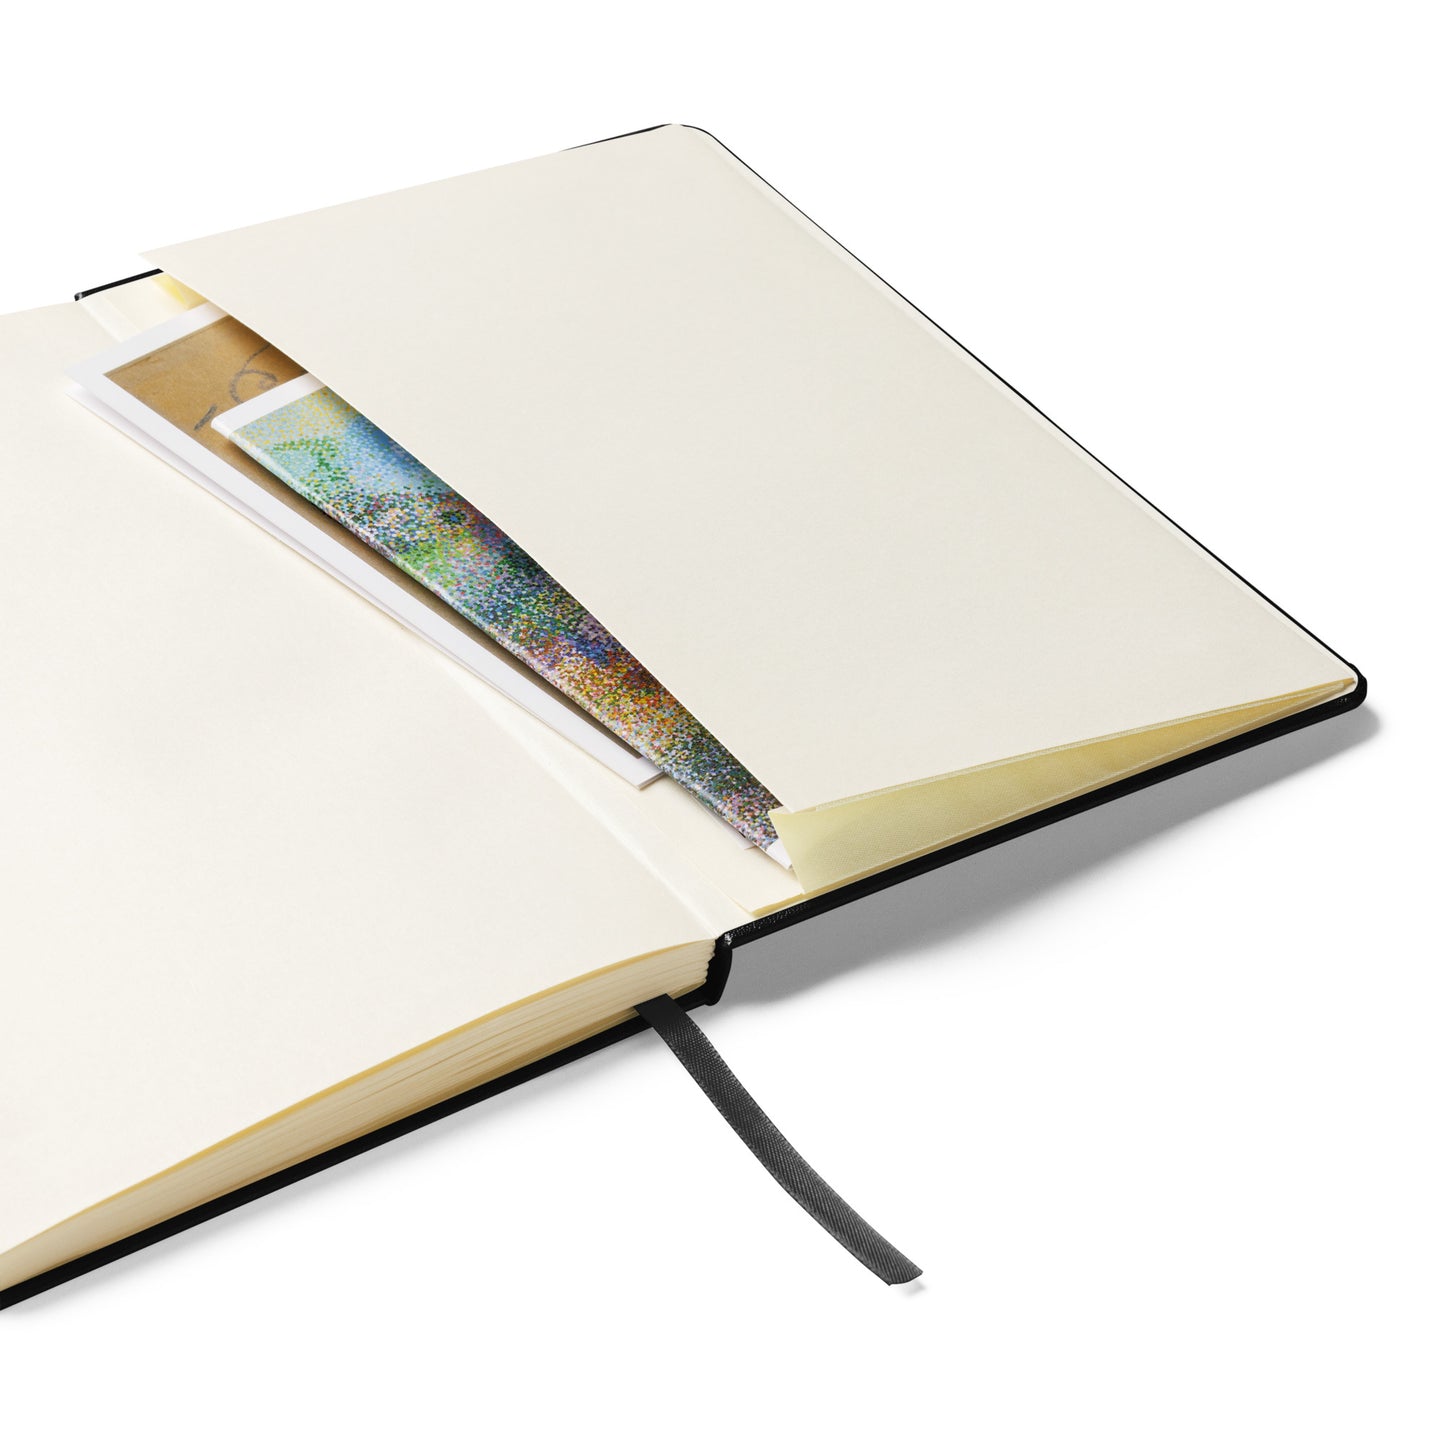 BLESSED Hardcover bound notebook